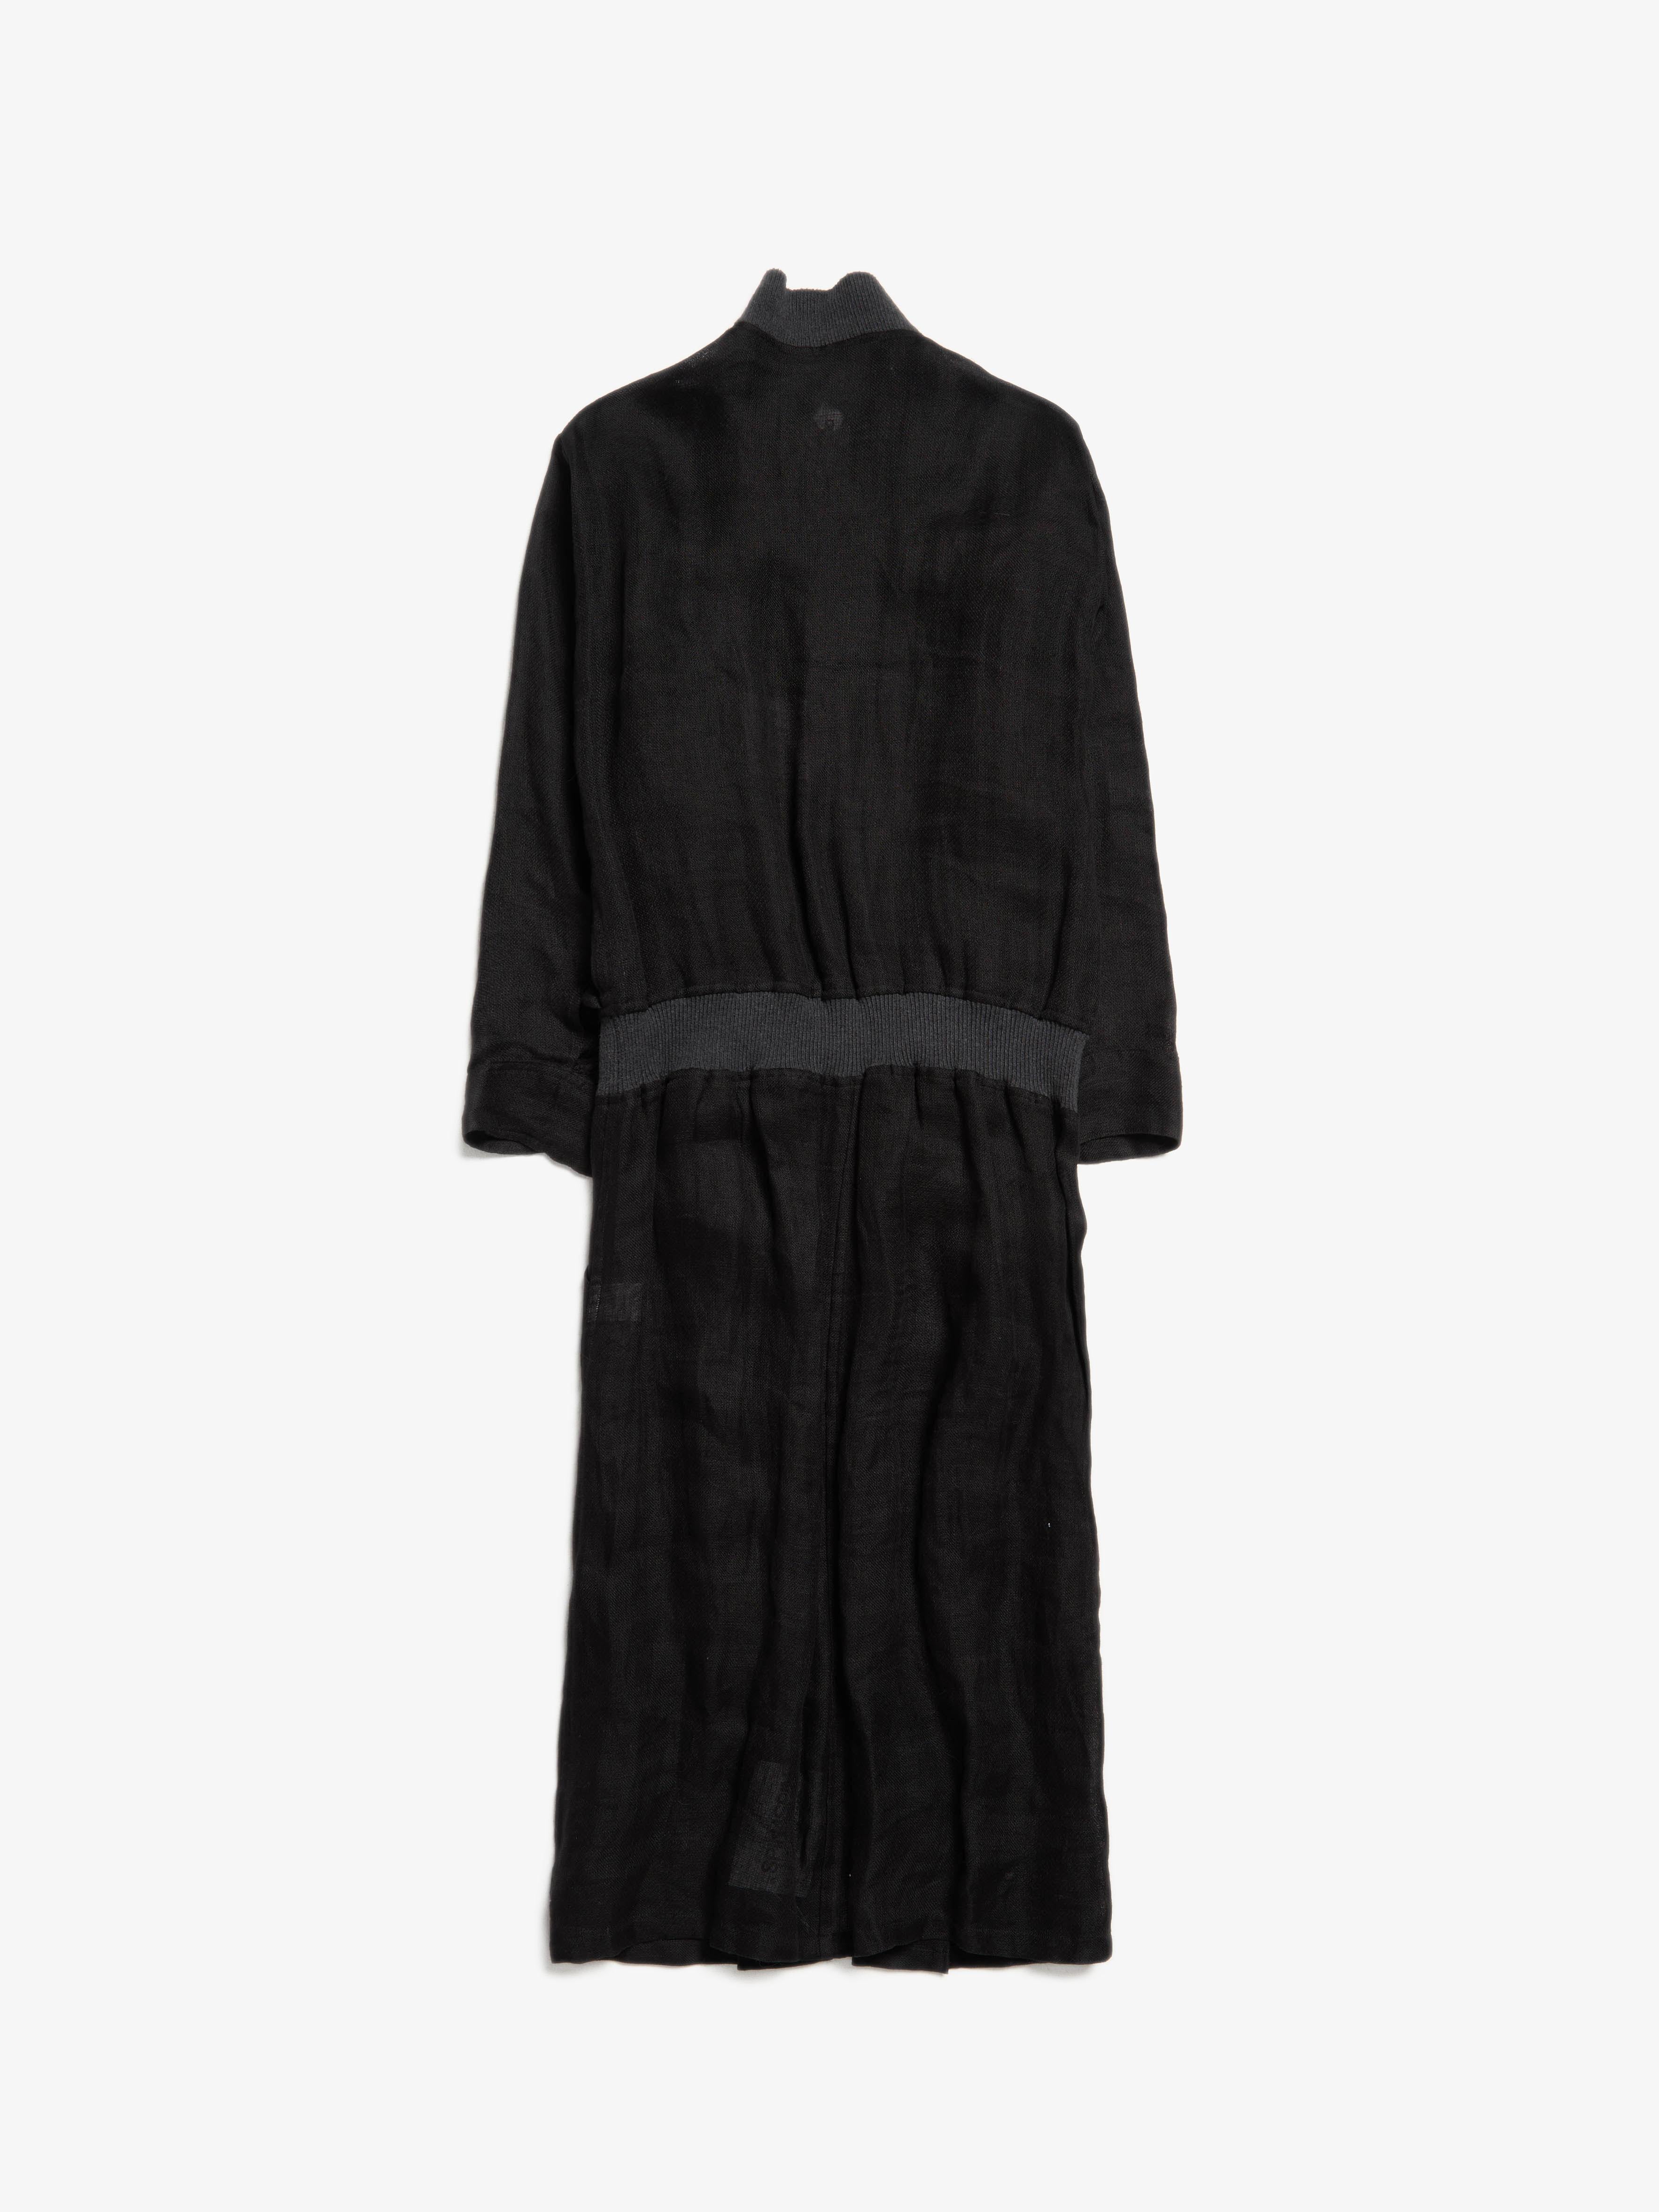 Yohji Yamamoto  Black And Gray Elongated Linen Cotton Zipped Robe 
Size marked: 2
Condition: Gently used
Material: 100% Linen / 82% Cotton / 16% Nylon / 2% Polyurethane
Measurements: Shoulder to shoulder (cm) 42,5/ pit to pit (cm) 48/ Length (cm)